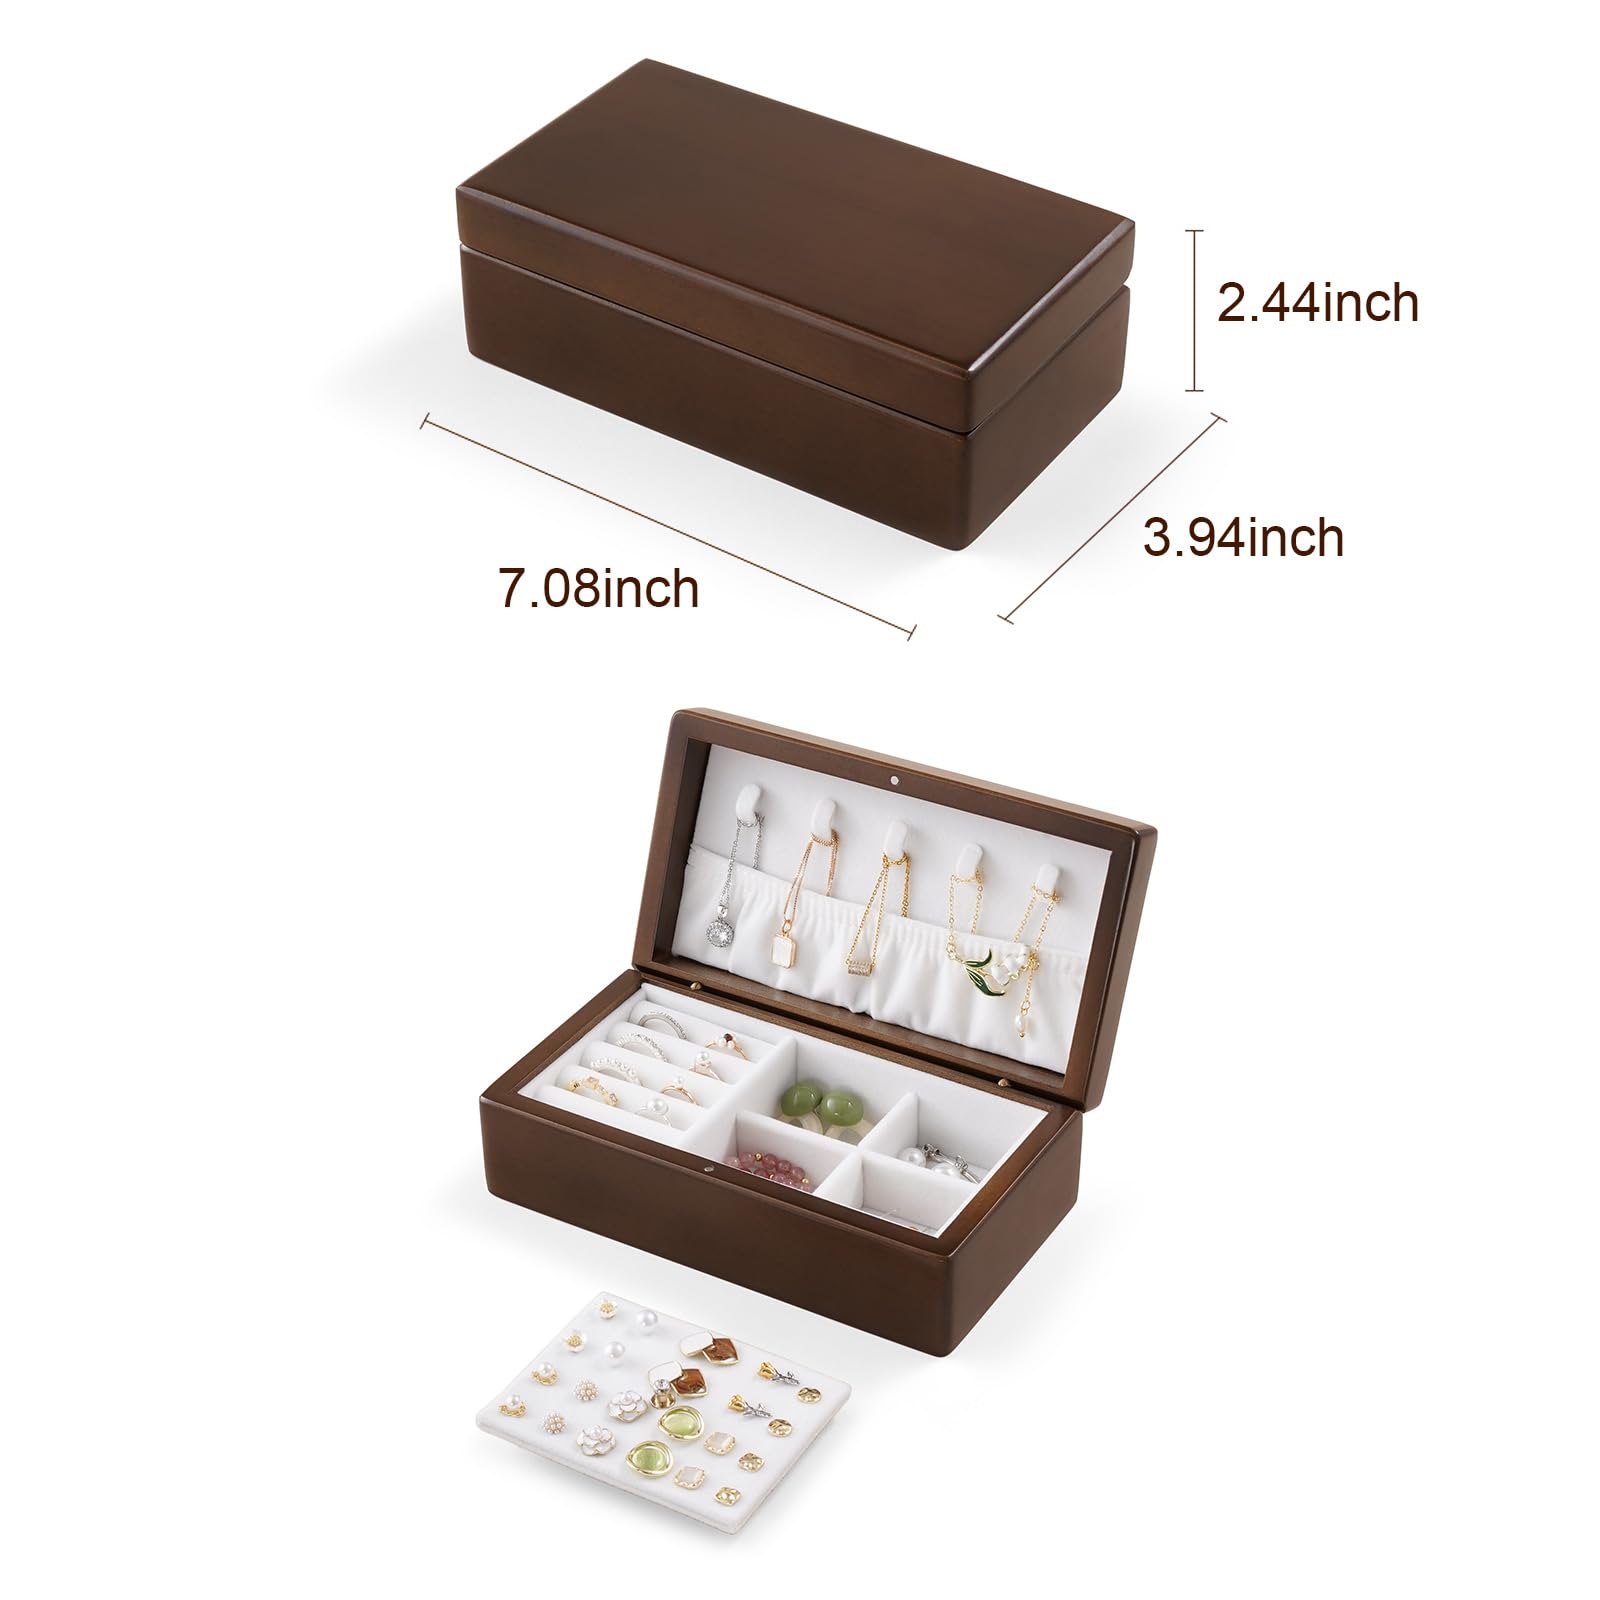 Small Wooden Jewelry Storage Box Solid Wood Jewelry Display Case for Women Necklace Rings Earrings Organizer for Bedroom